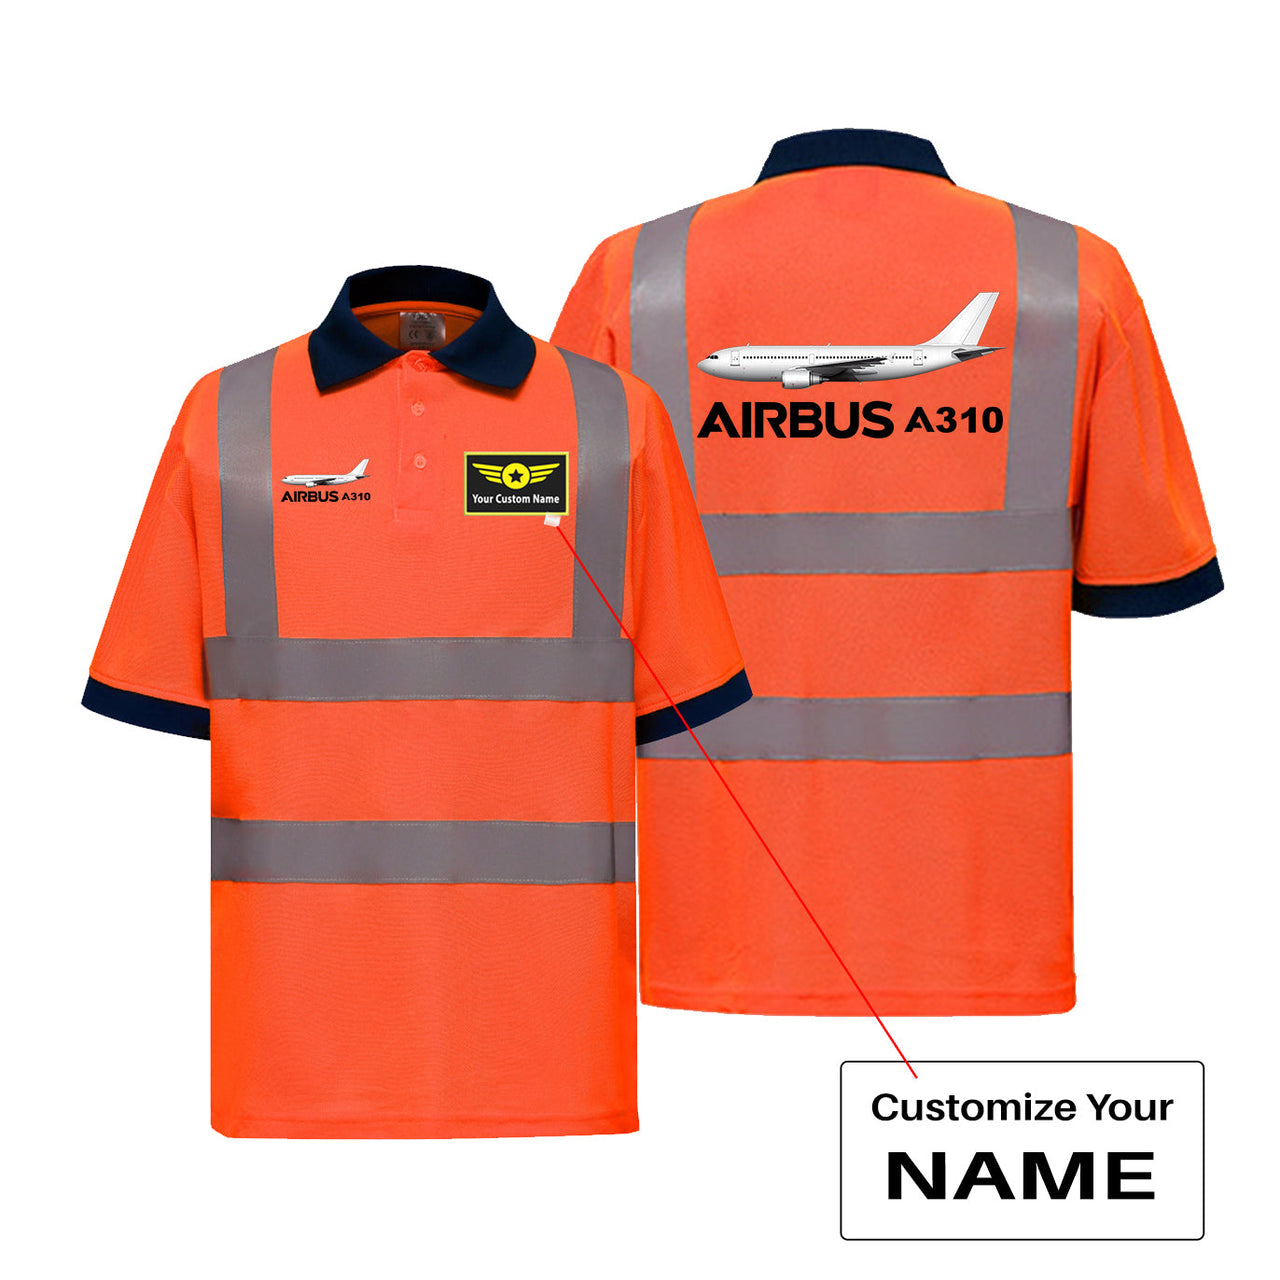 The Airbus A320 Designed Reflective Polo T-Shirts